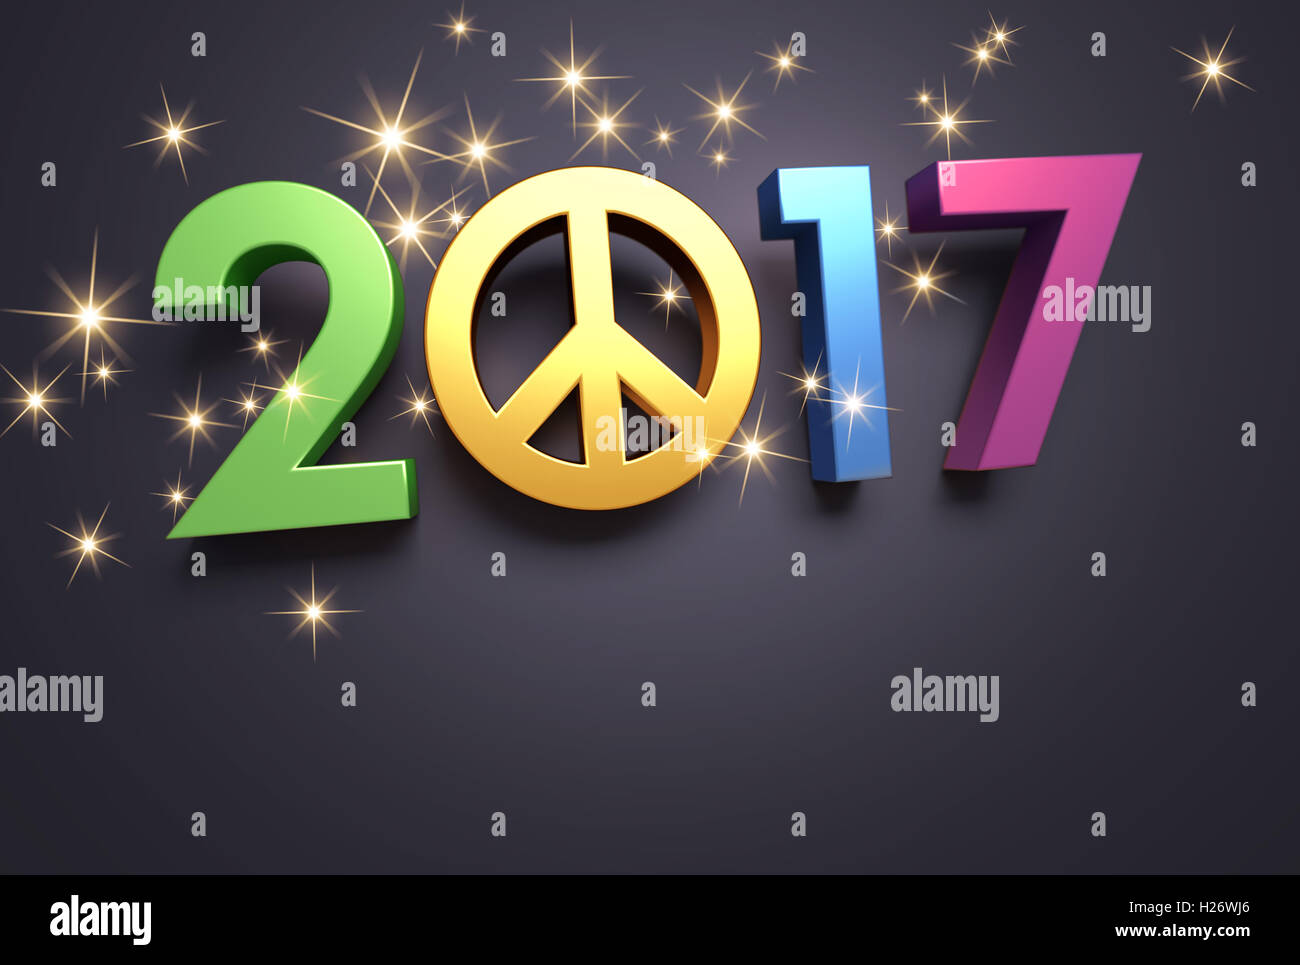 Colorful 2017 year type with peace and love symbol on a festive black background - 3D illustration Stock Photo